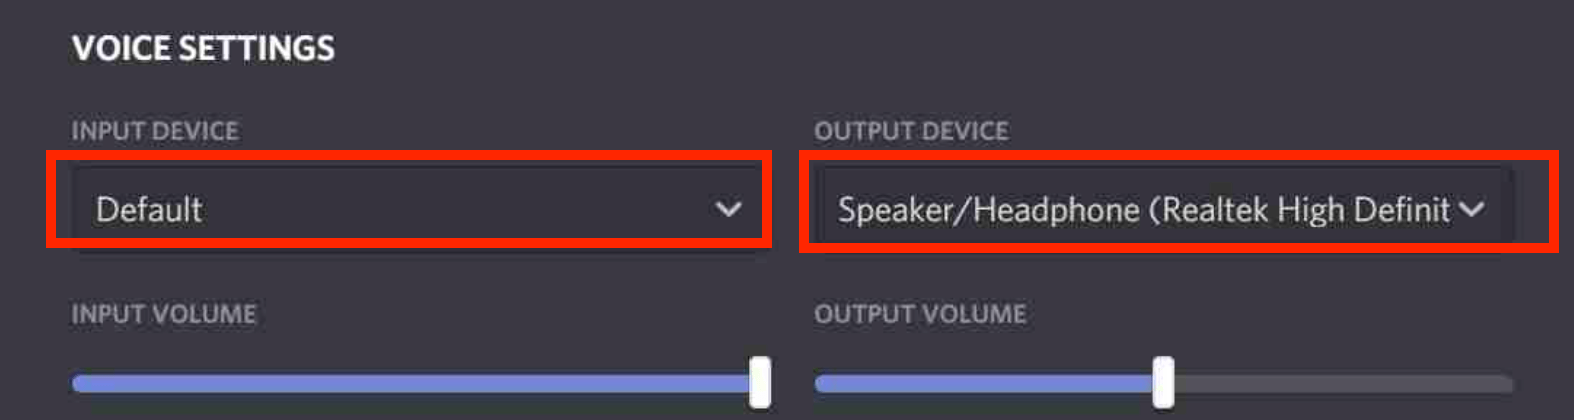 does windows game dvr record discord audio